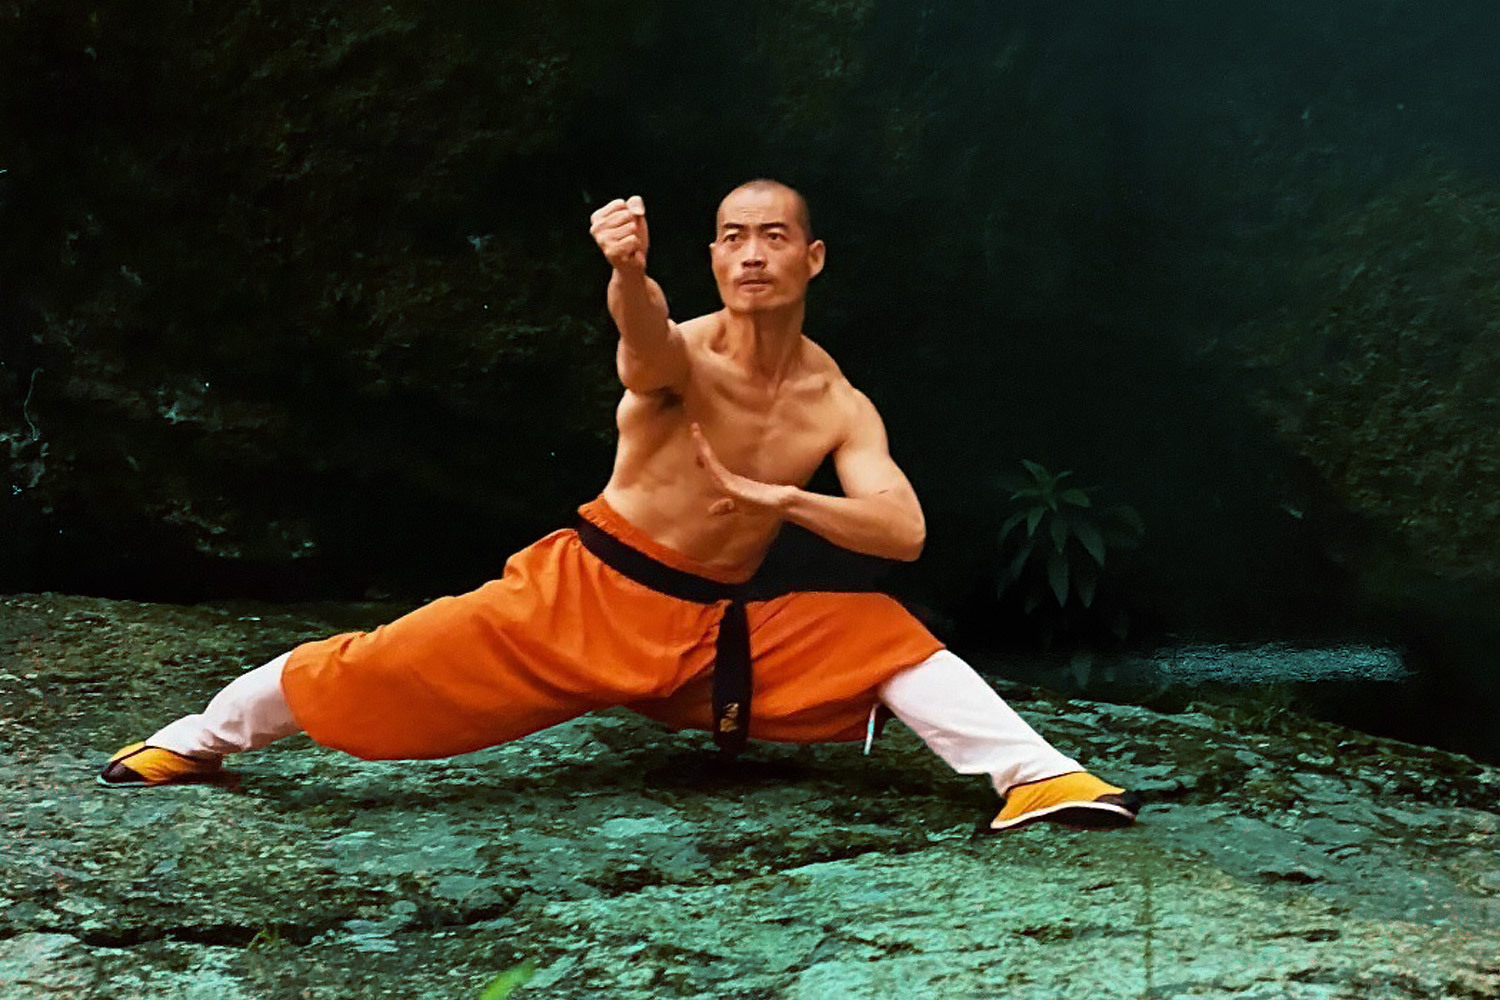 Top Kung Fu Classes in Hosur - Best Chinese Martial Art Classes - Justdial